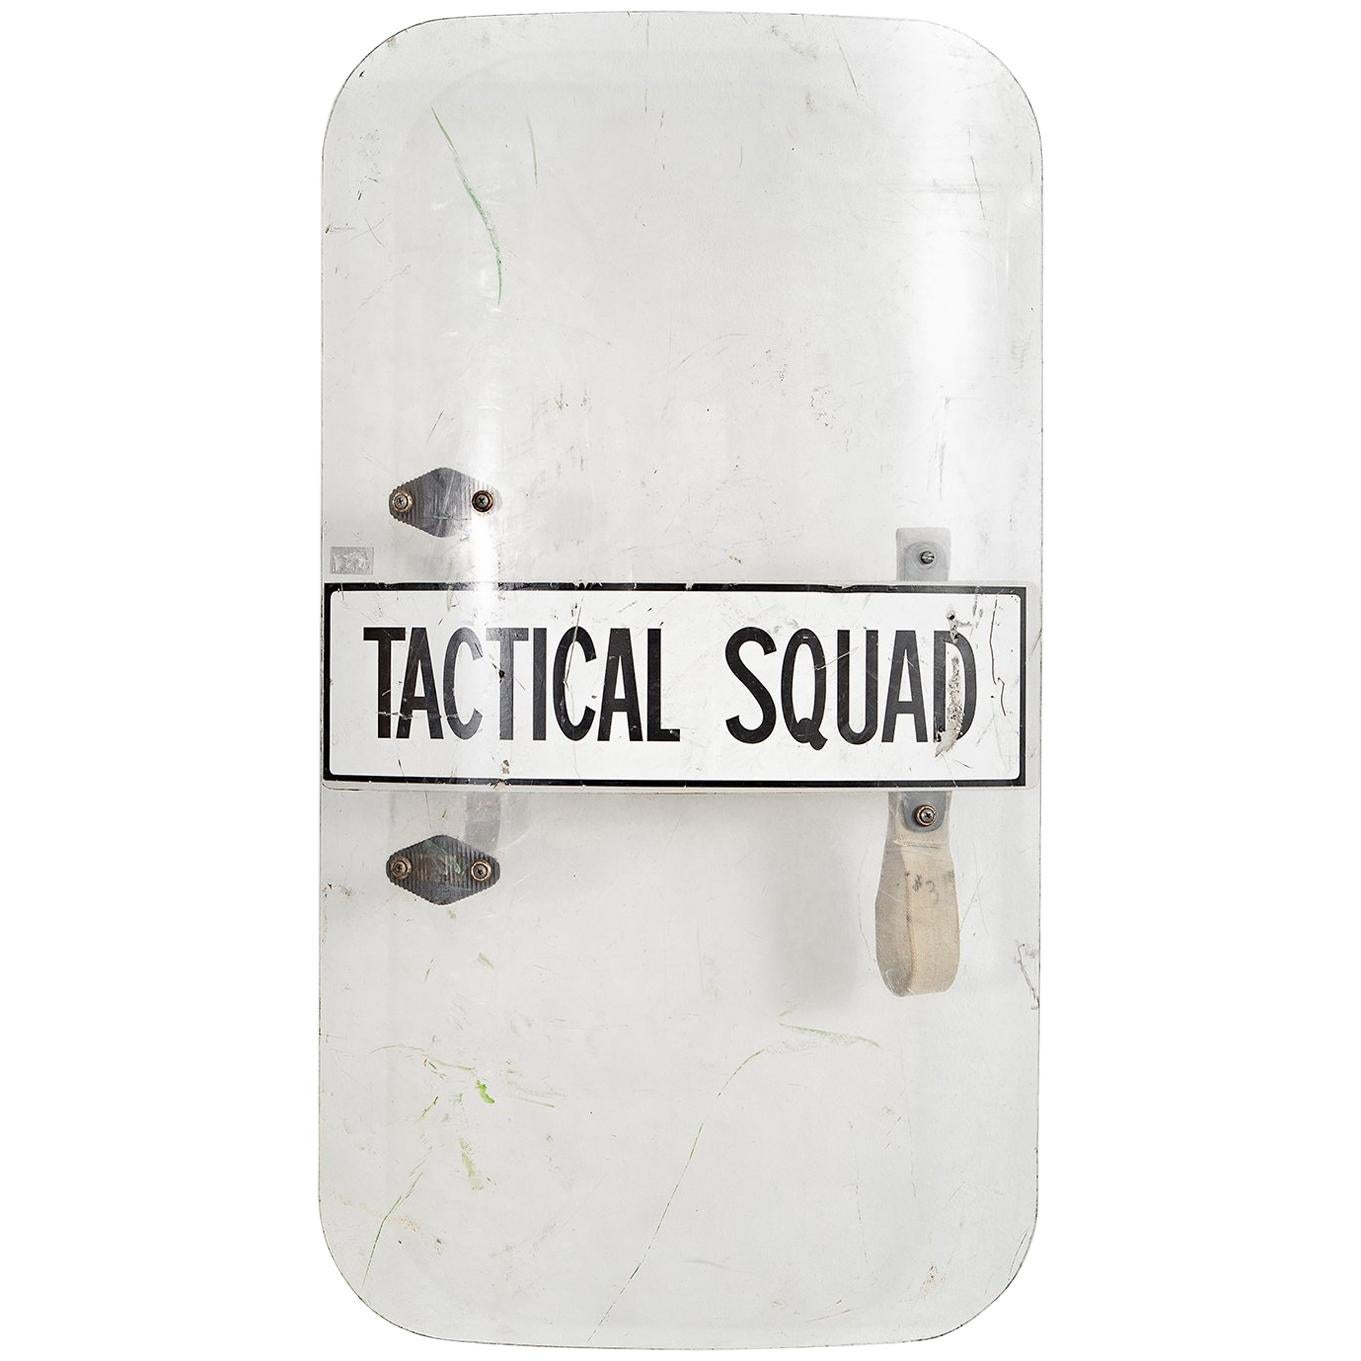 Tactical Shield from DeBerry Correctional Prison For Sale